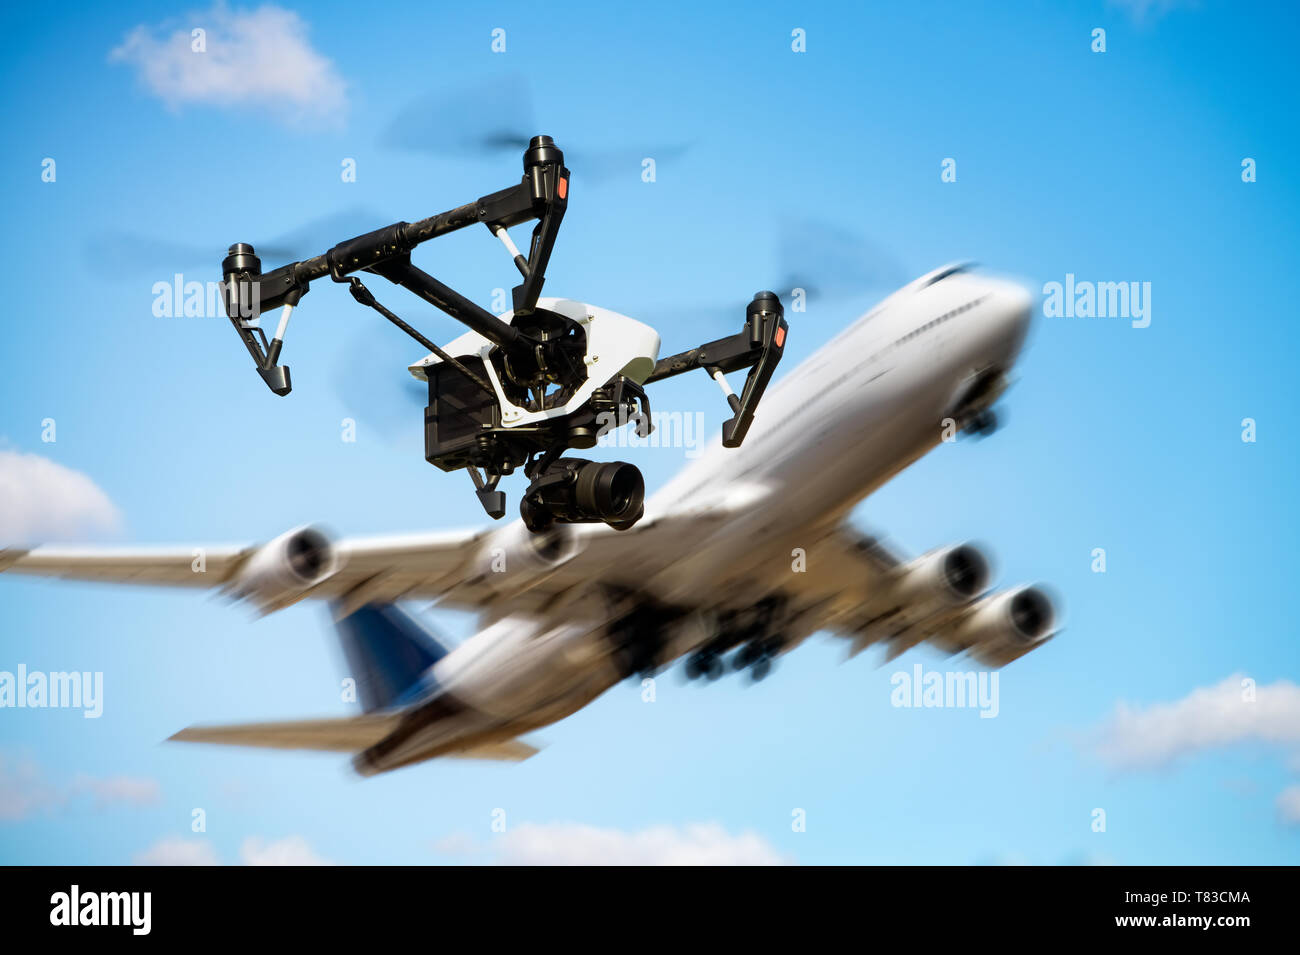 A drone comes dangerously close to a taking off plane. [M] Stock Photo